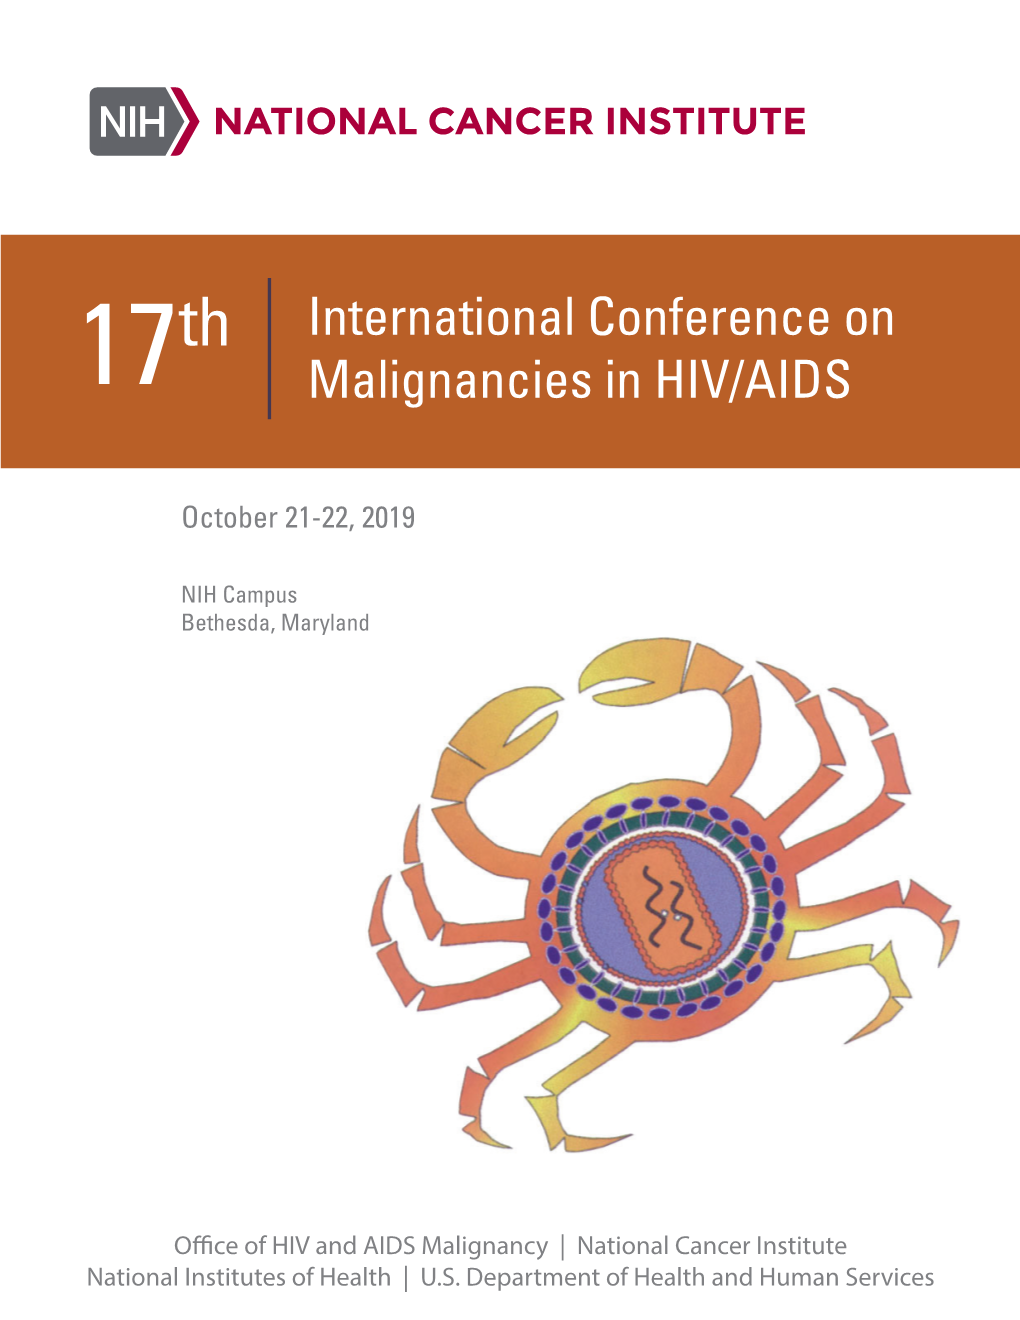 International Conference on Malignancies in HIV/AIDS